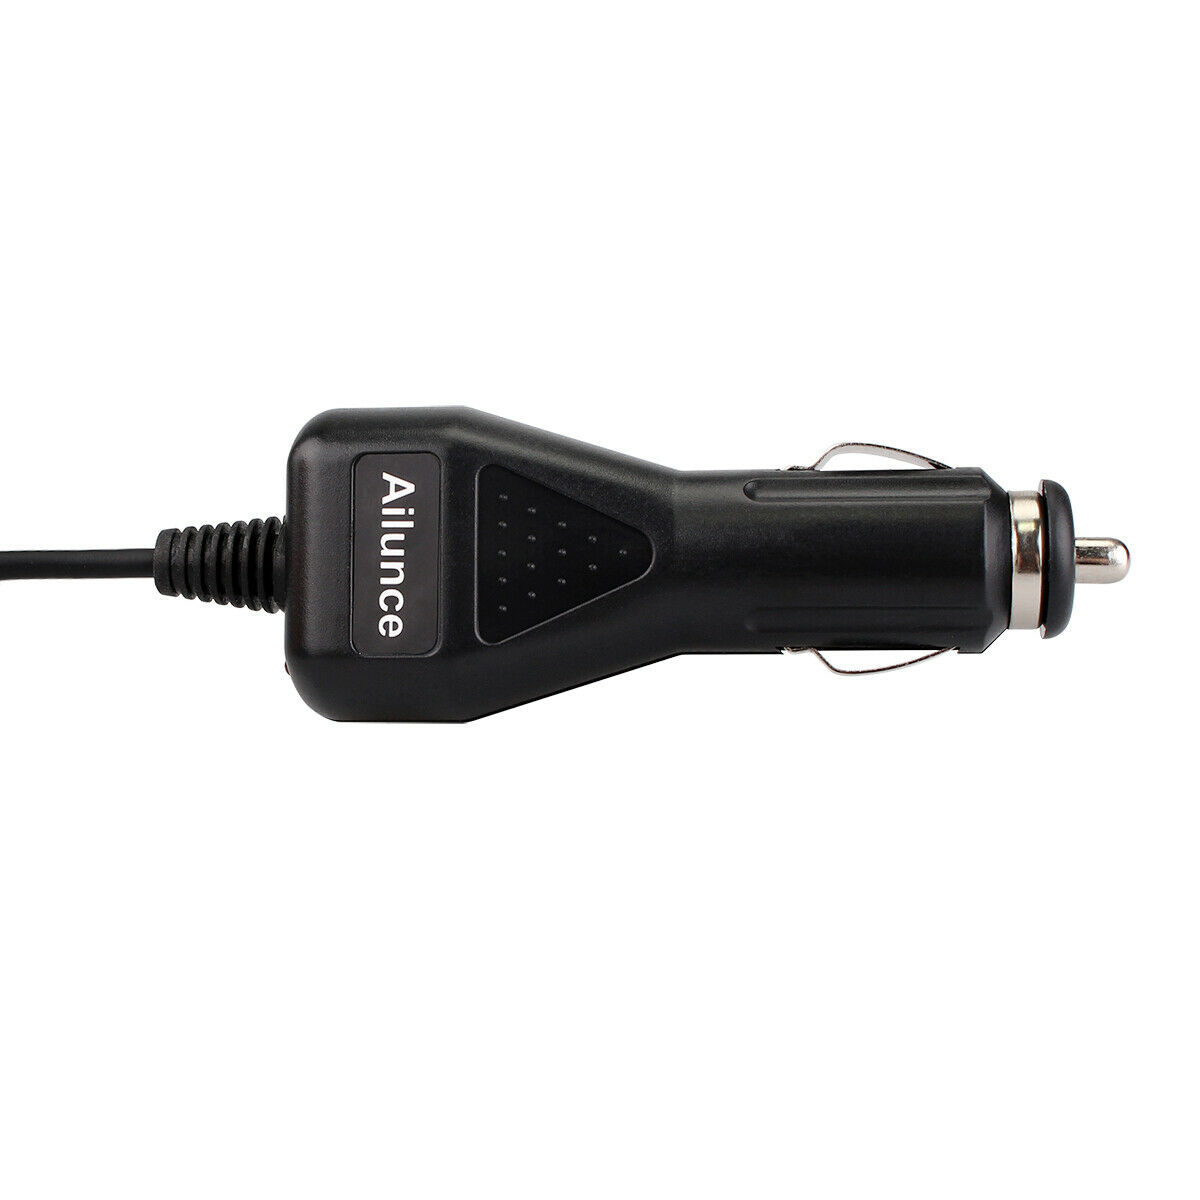 Ailunce HD1 Car Charger Cable with Cigarette Lighter Plug